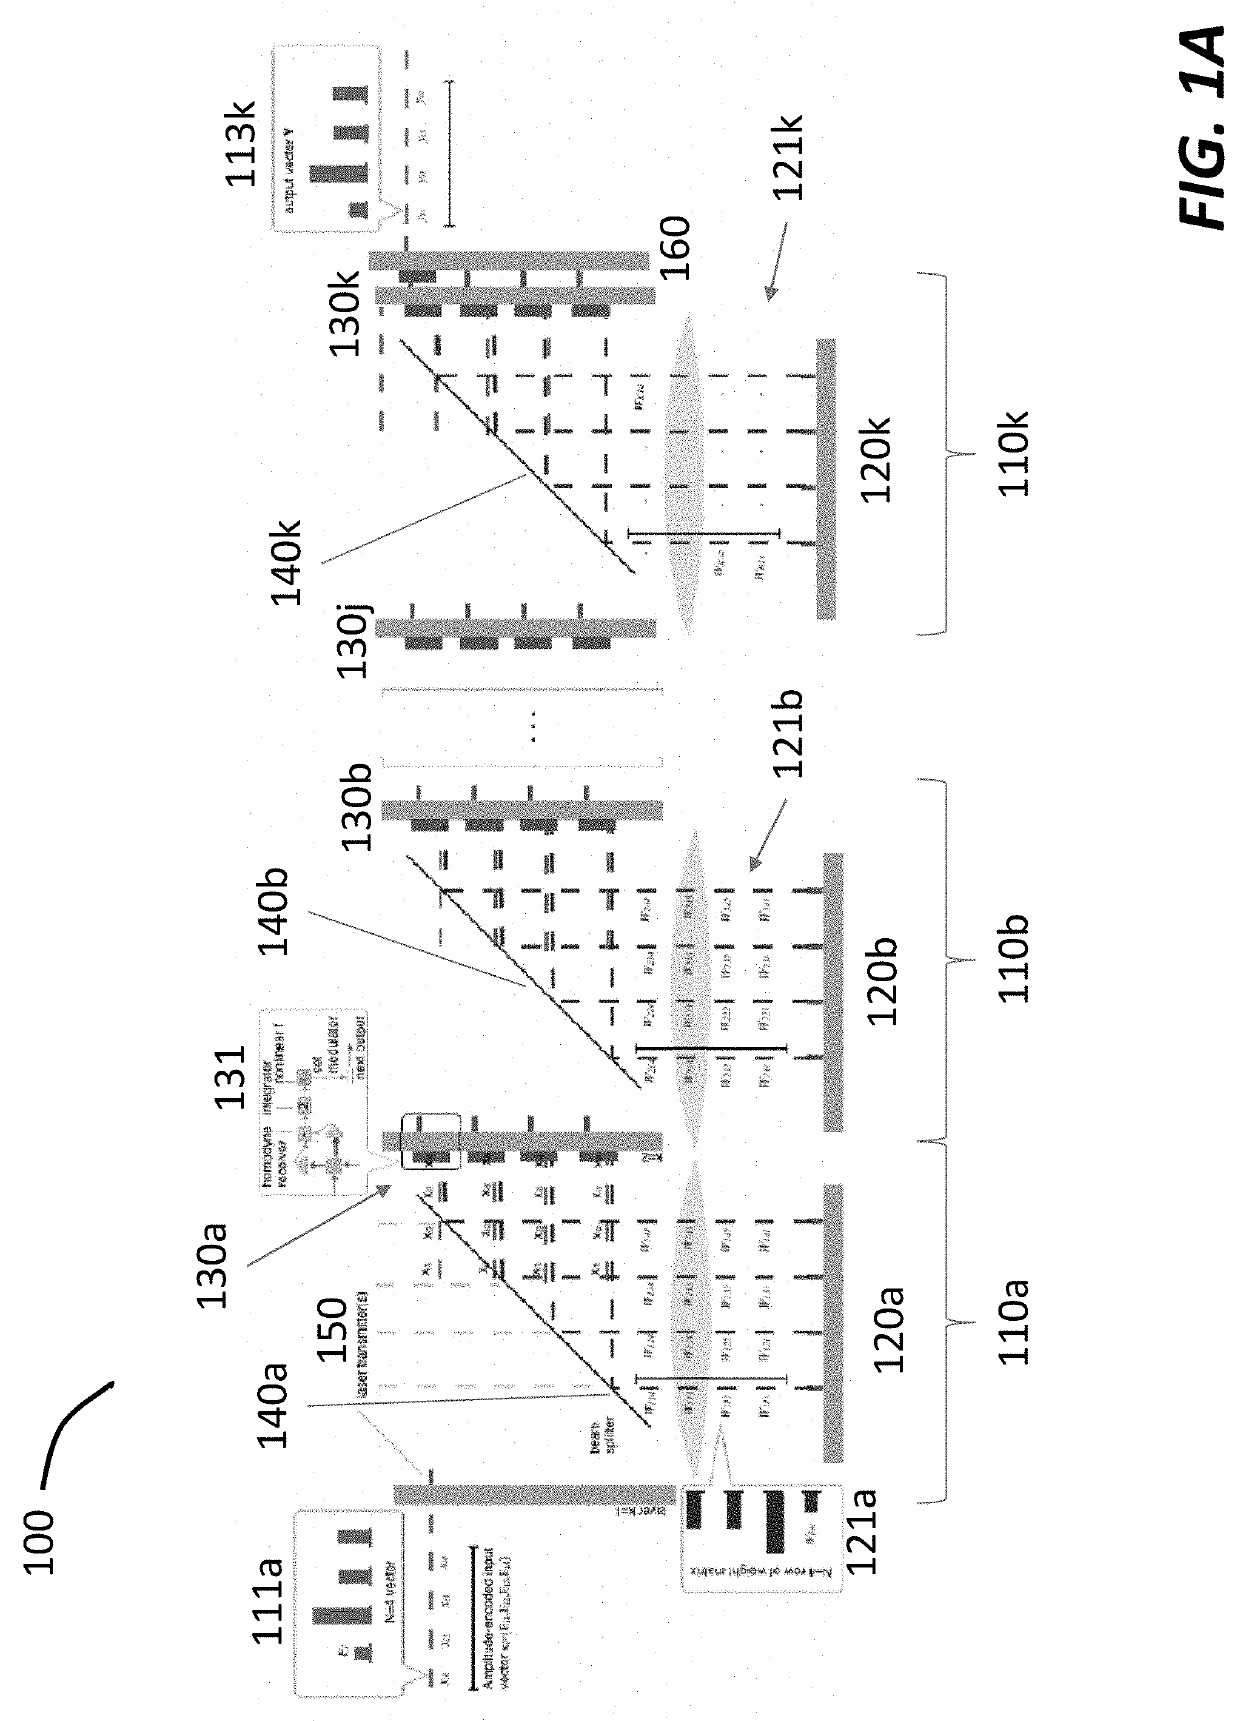 Serialized electro-optic neural network using optical weights encoding